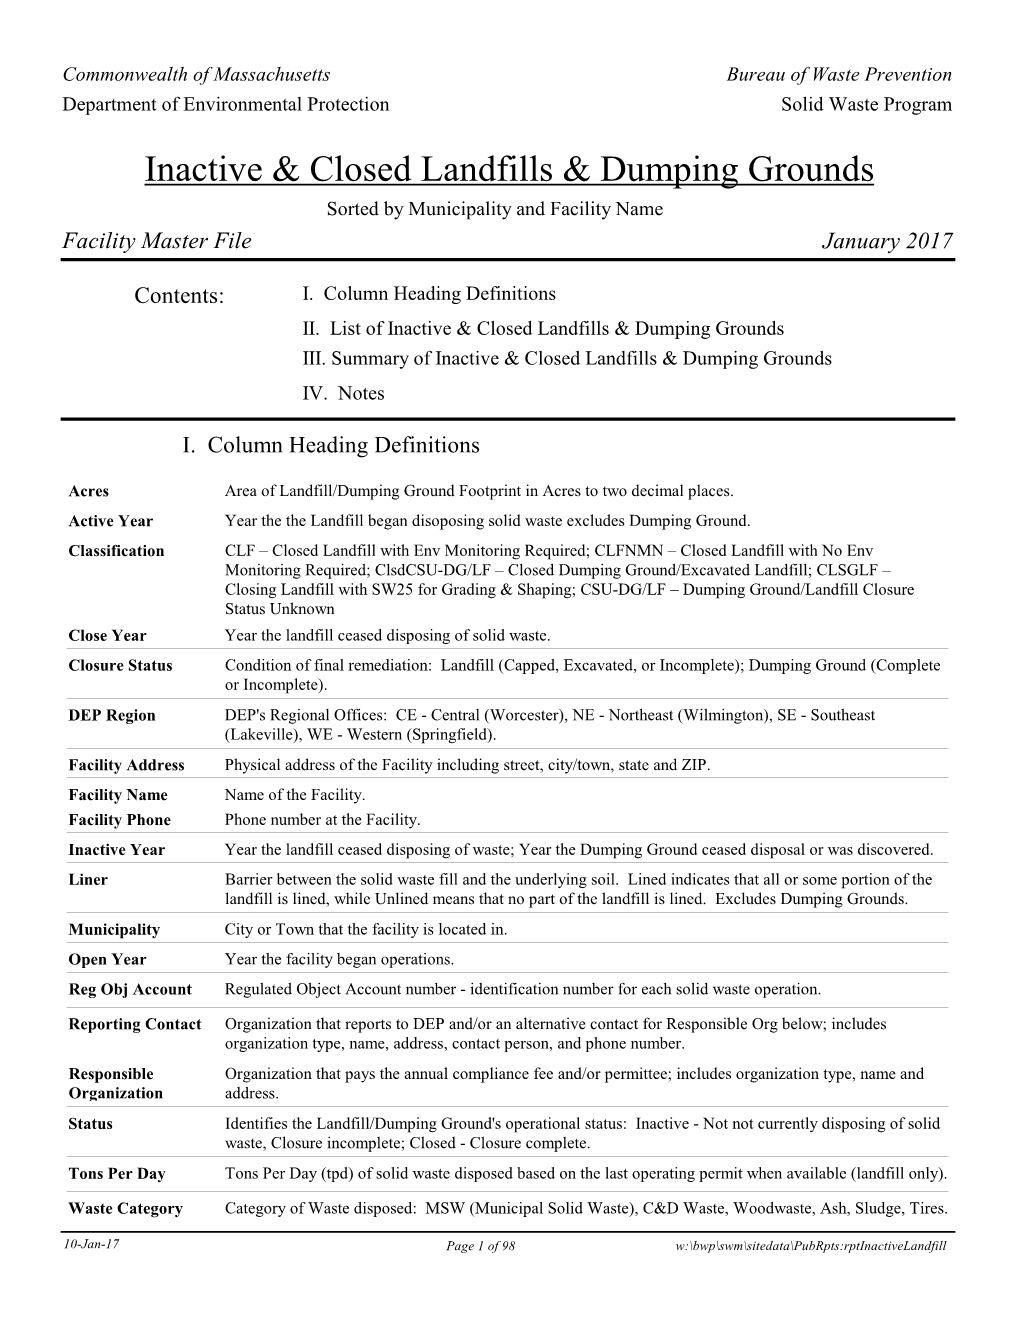 Inactive & Closed Landfills & Dumping Grounds